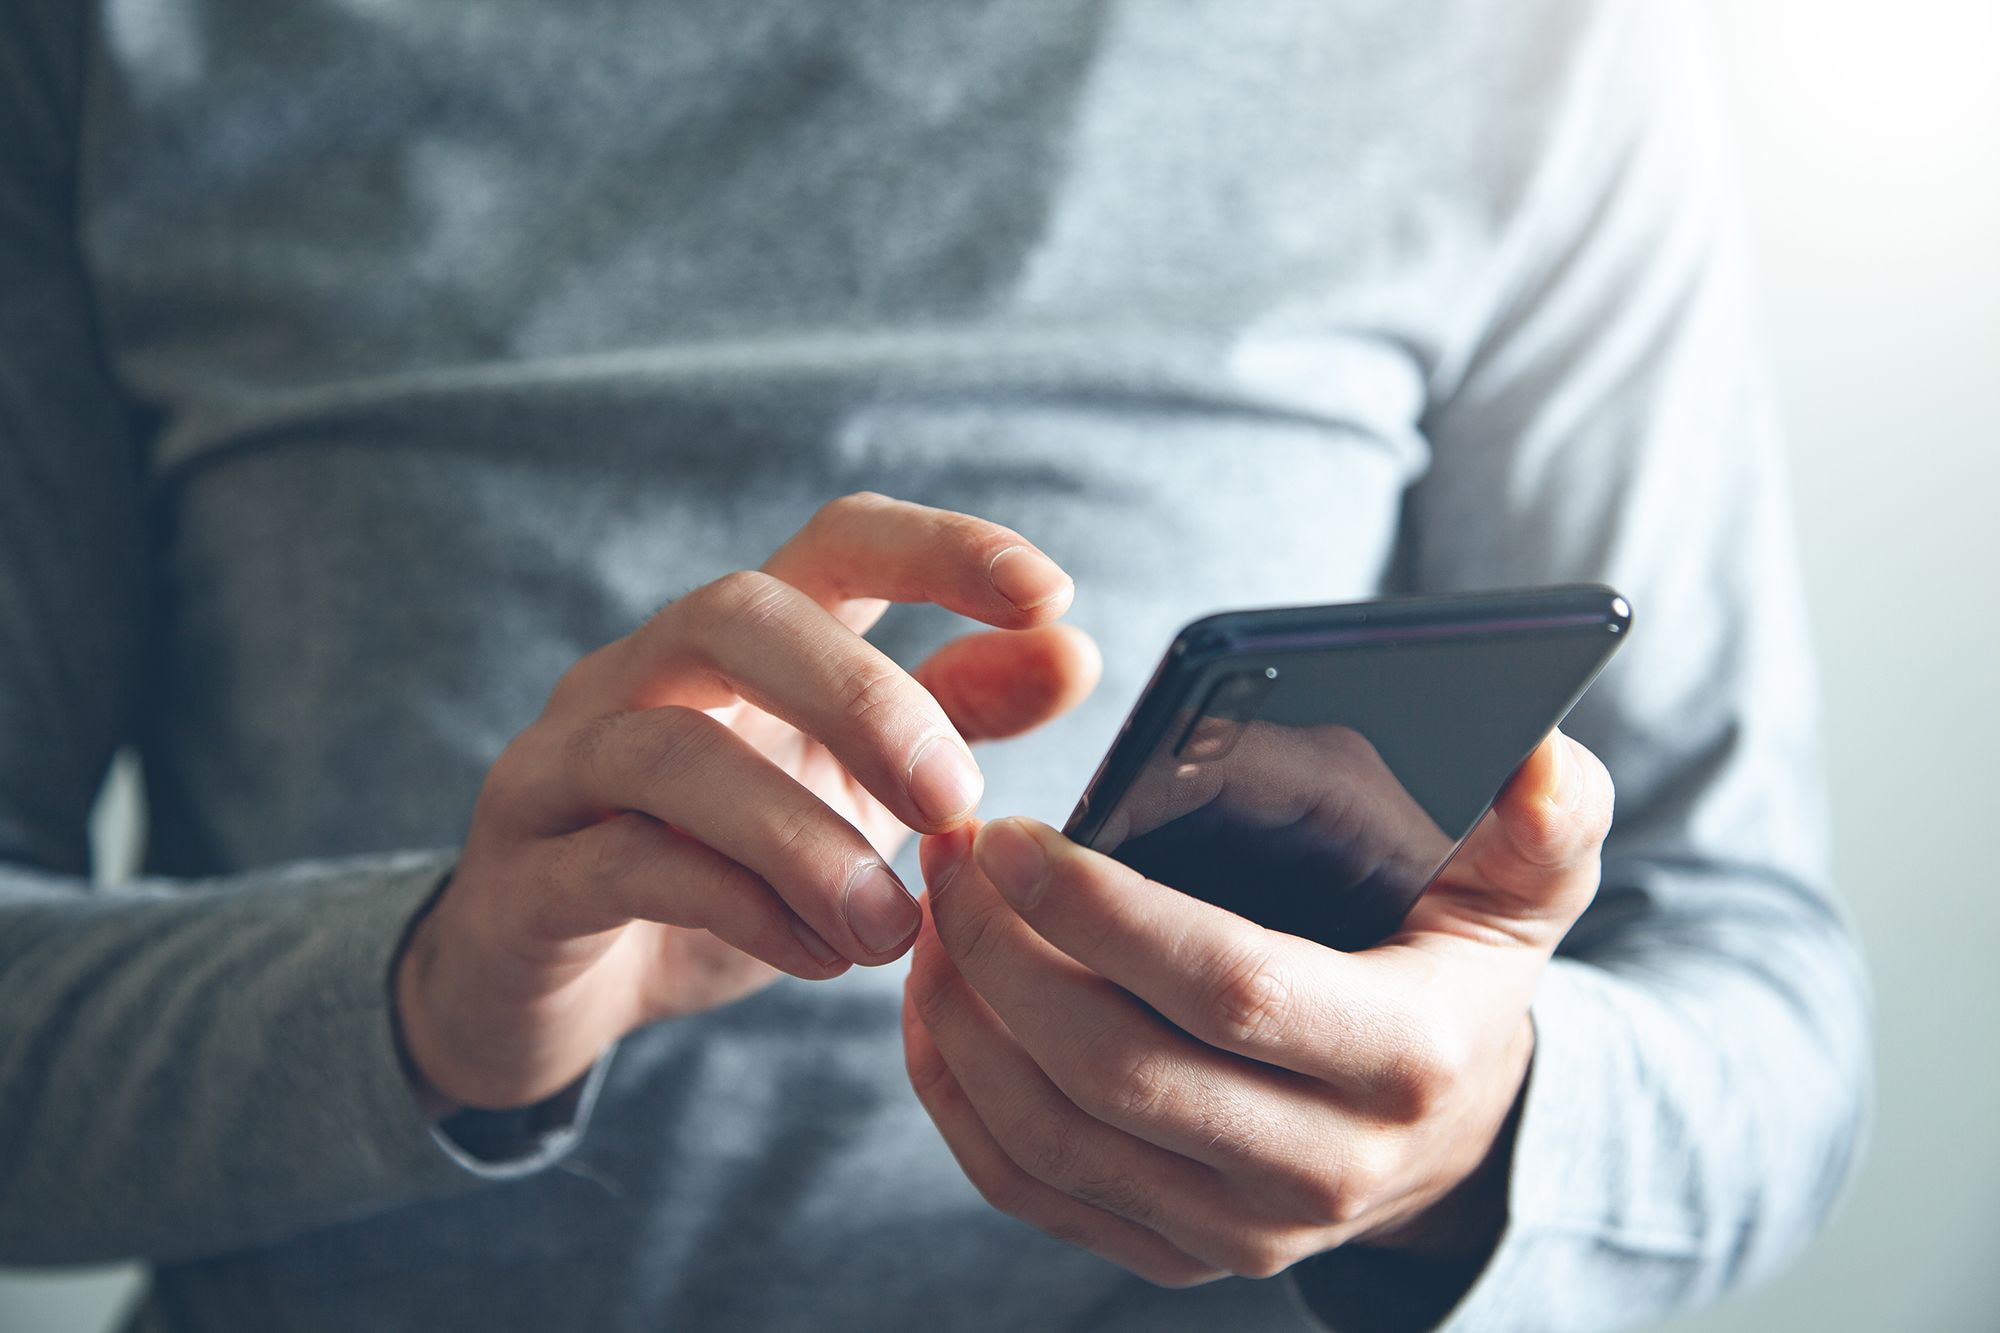 Text message scams are on the rise. Here's what you can do to prevent them  | CNN Business